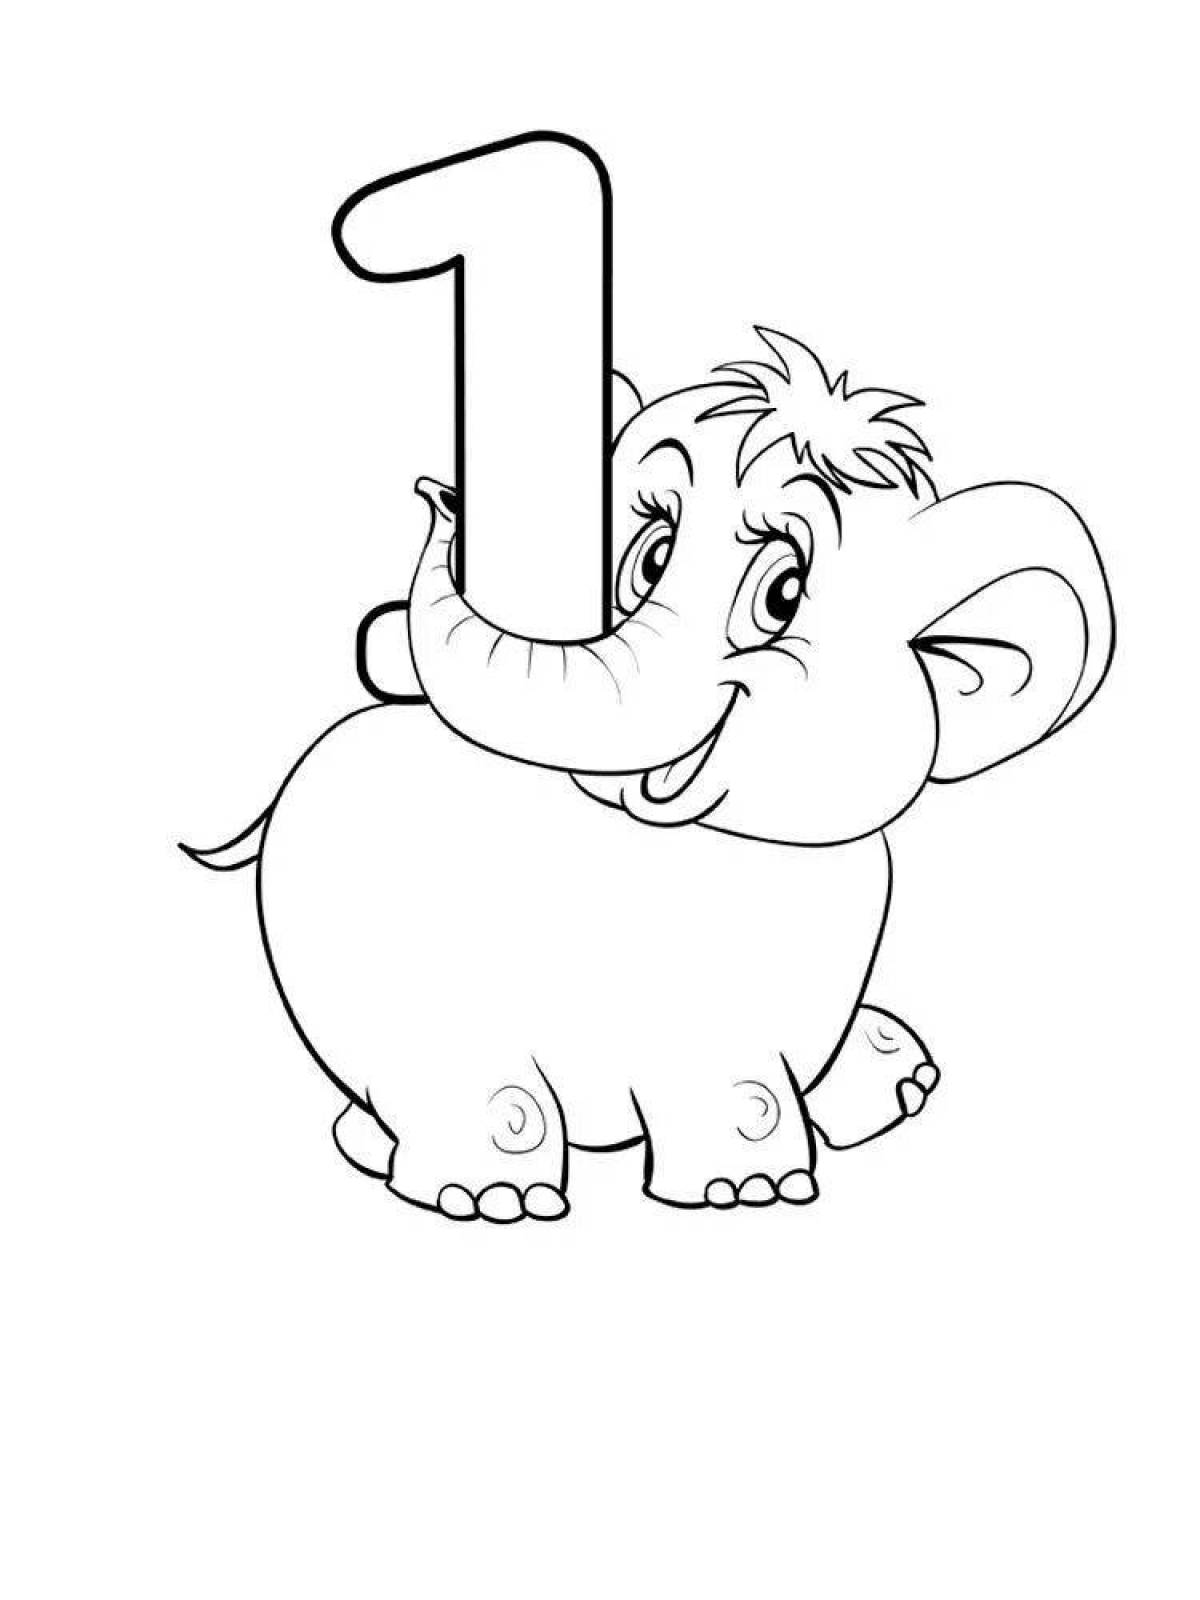 Updated single digit coloring page